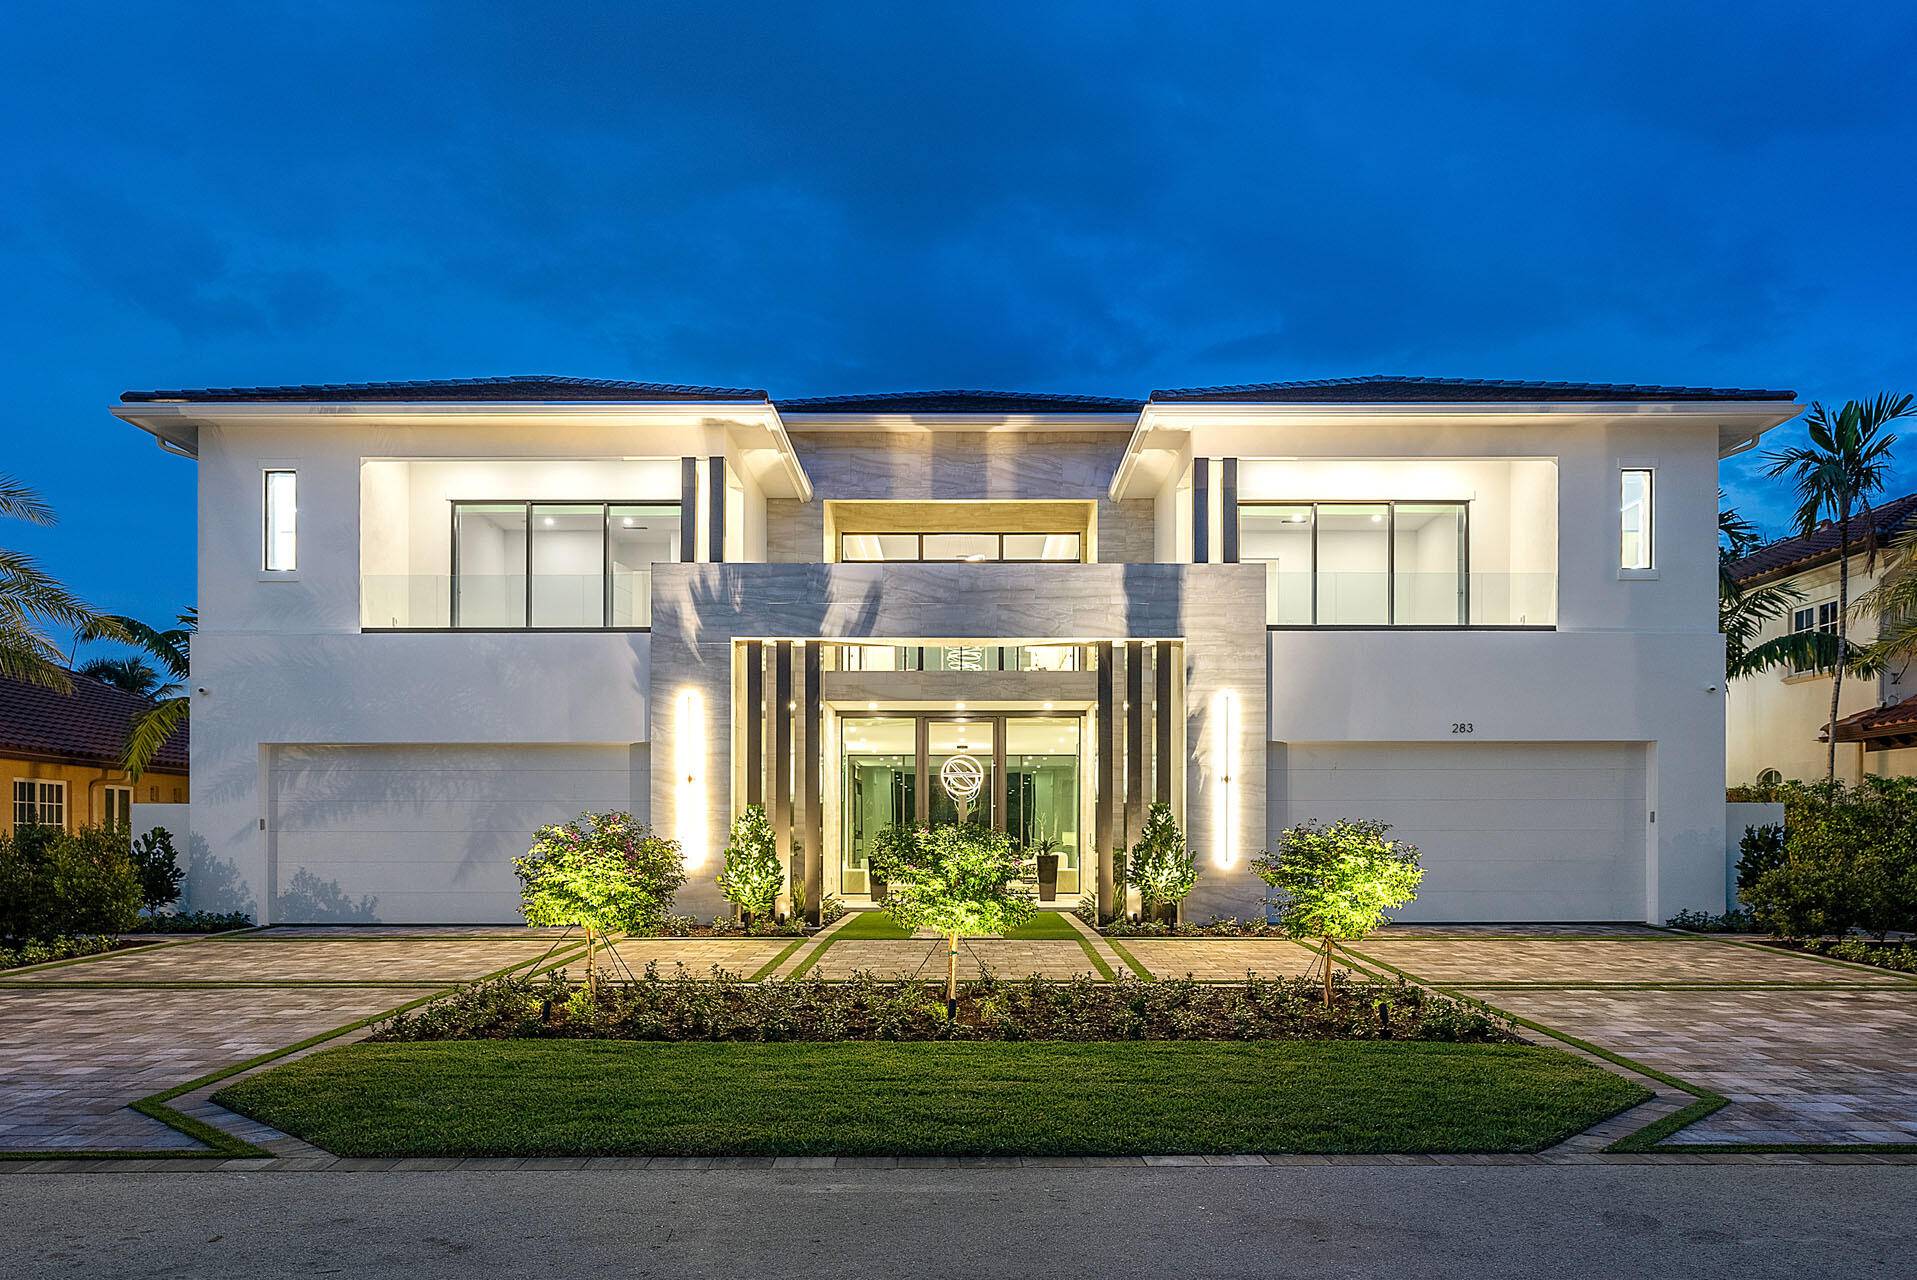 Discover contemporary luxury at 283 Sabal Palm Terrace, an architectural masterpiece in the exclusive Royal Palm Yacht Country Club community.